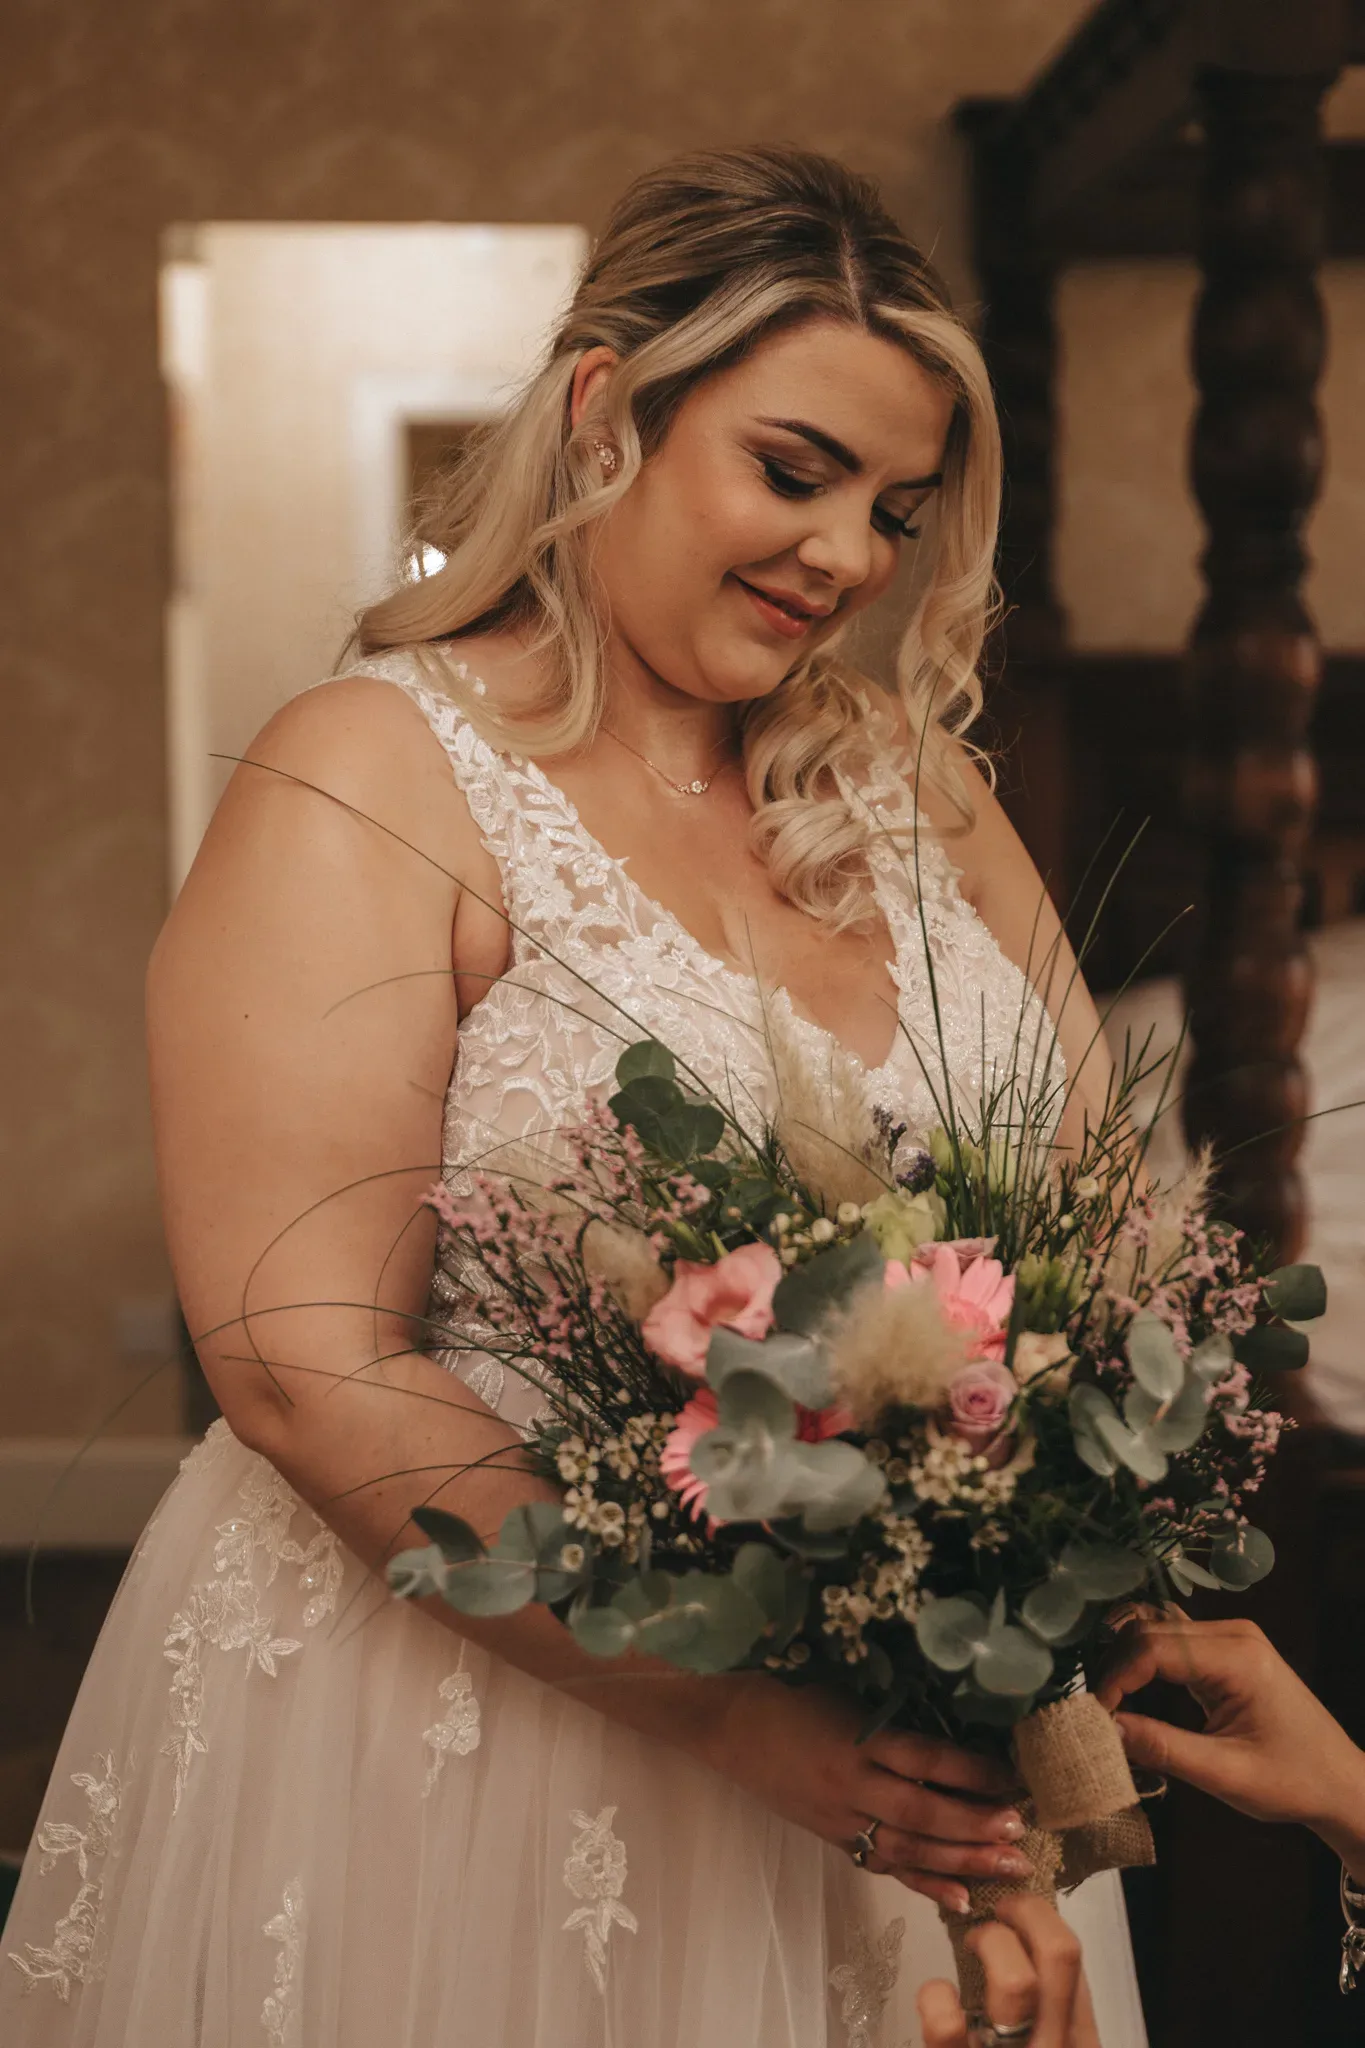 A radiant bride in a lace wedding dress gazes affectionately at her bouquet of pink, white, and green flowers, with warm lighting enhancing the elegant indoor setting.